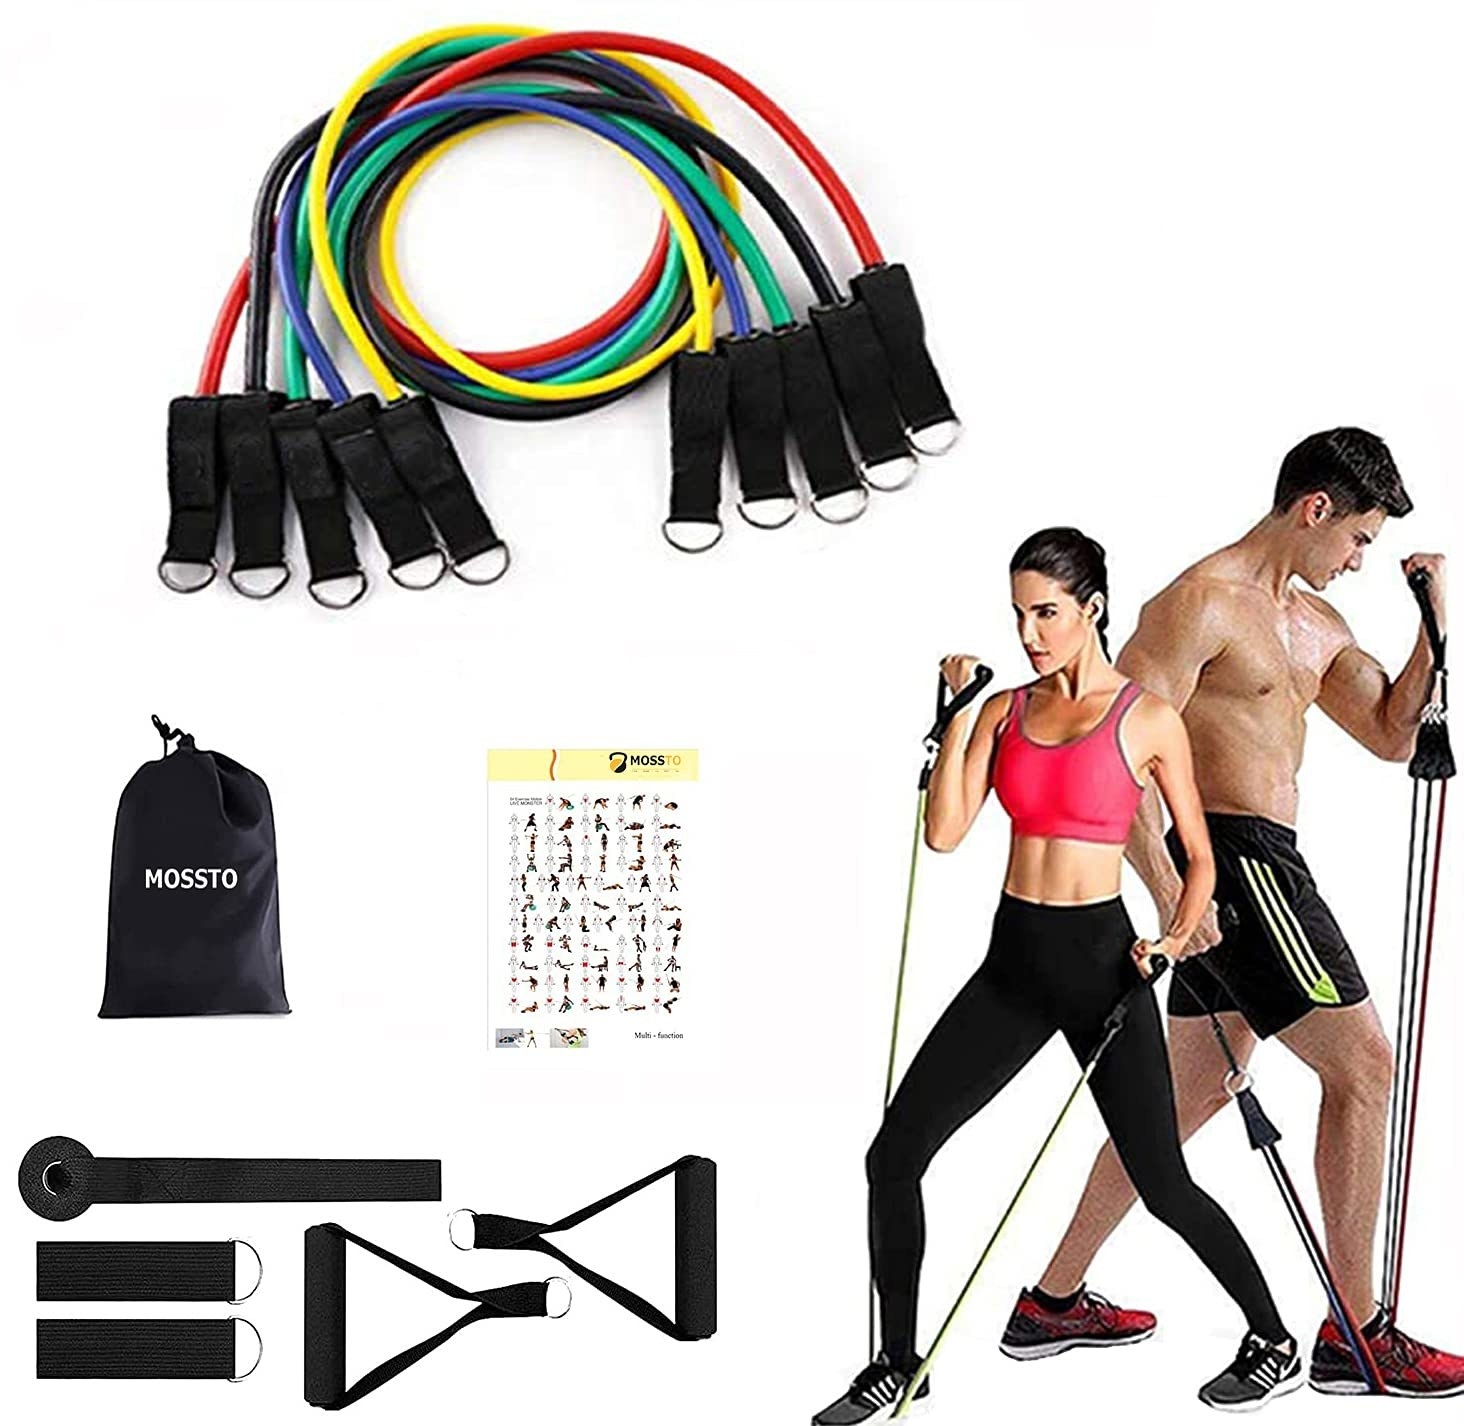 A man and woman working out using the resistance bands, next to a collage of equipment included with the product